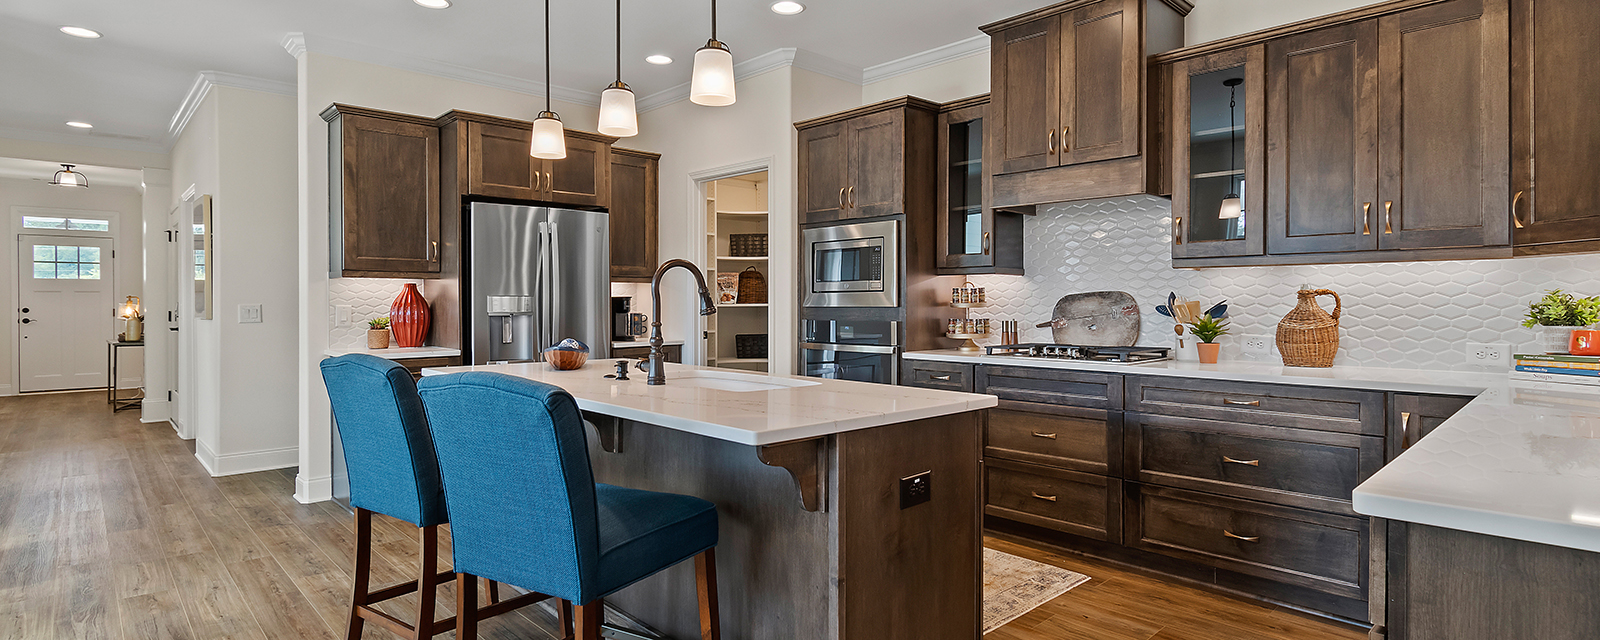 Whether at the clubhouse, on your cozy patio or in your wide open kitchen and living room, our 55+ active adult communities throughout Georgia and their homes and built for entertaining friends and family.